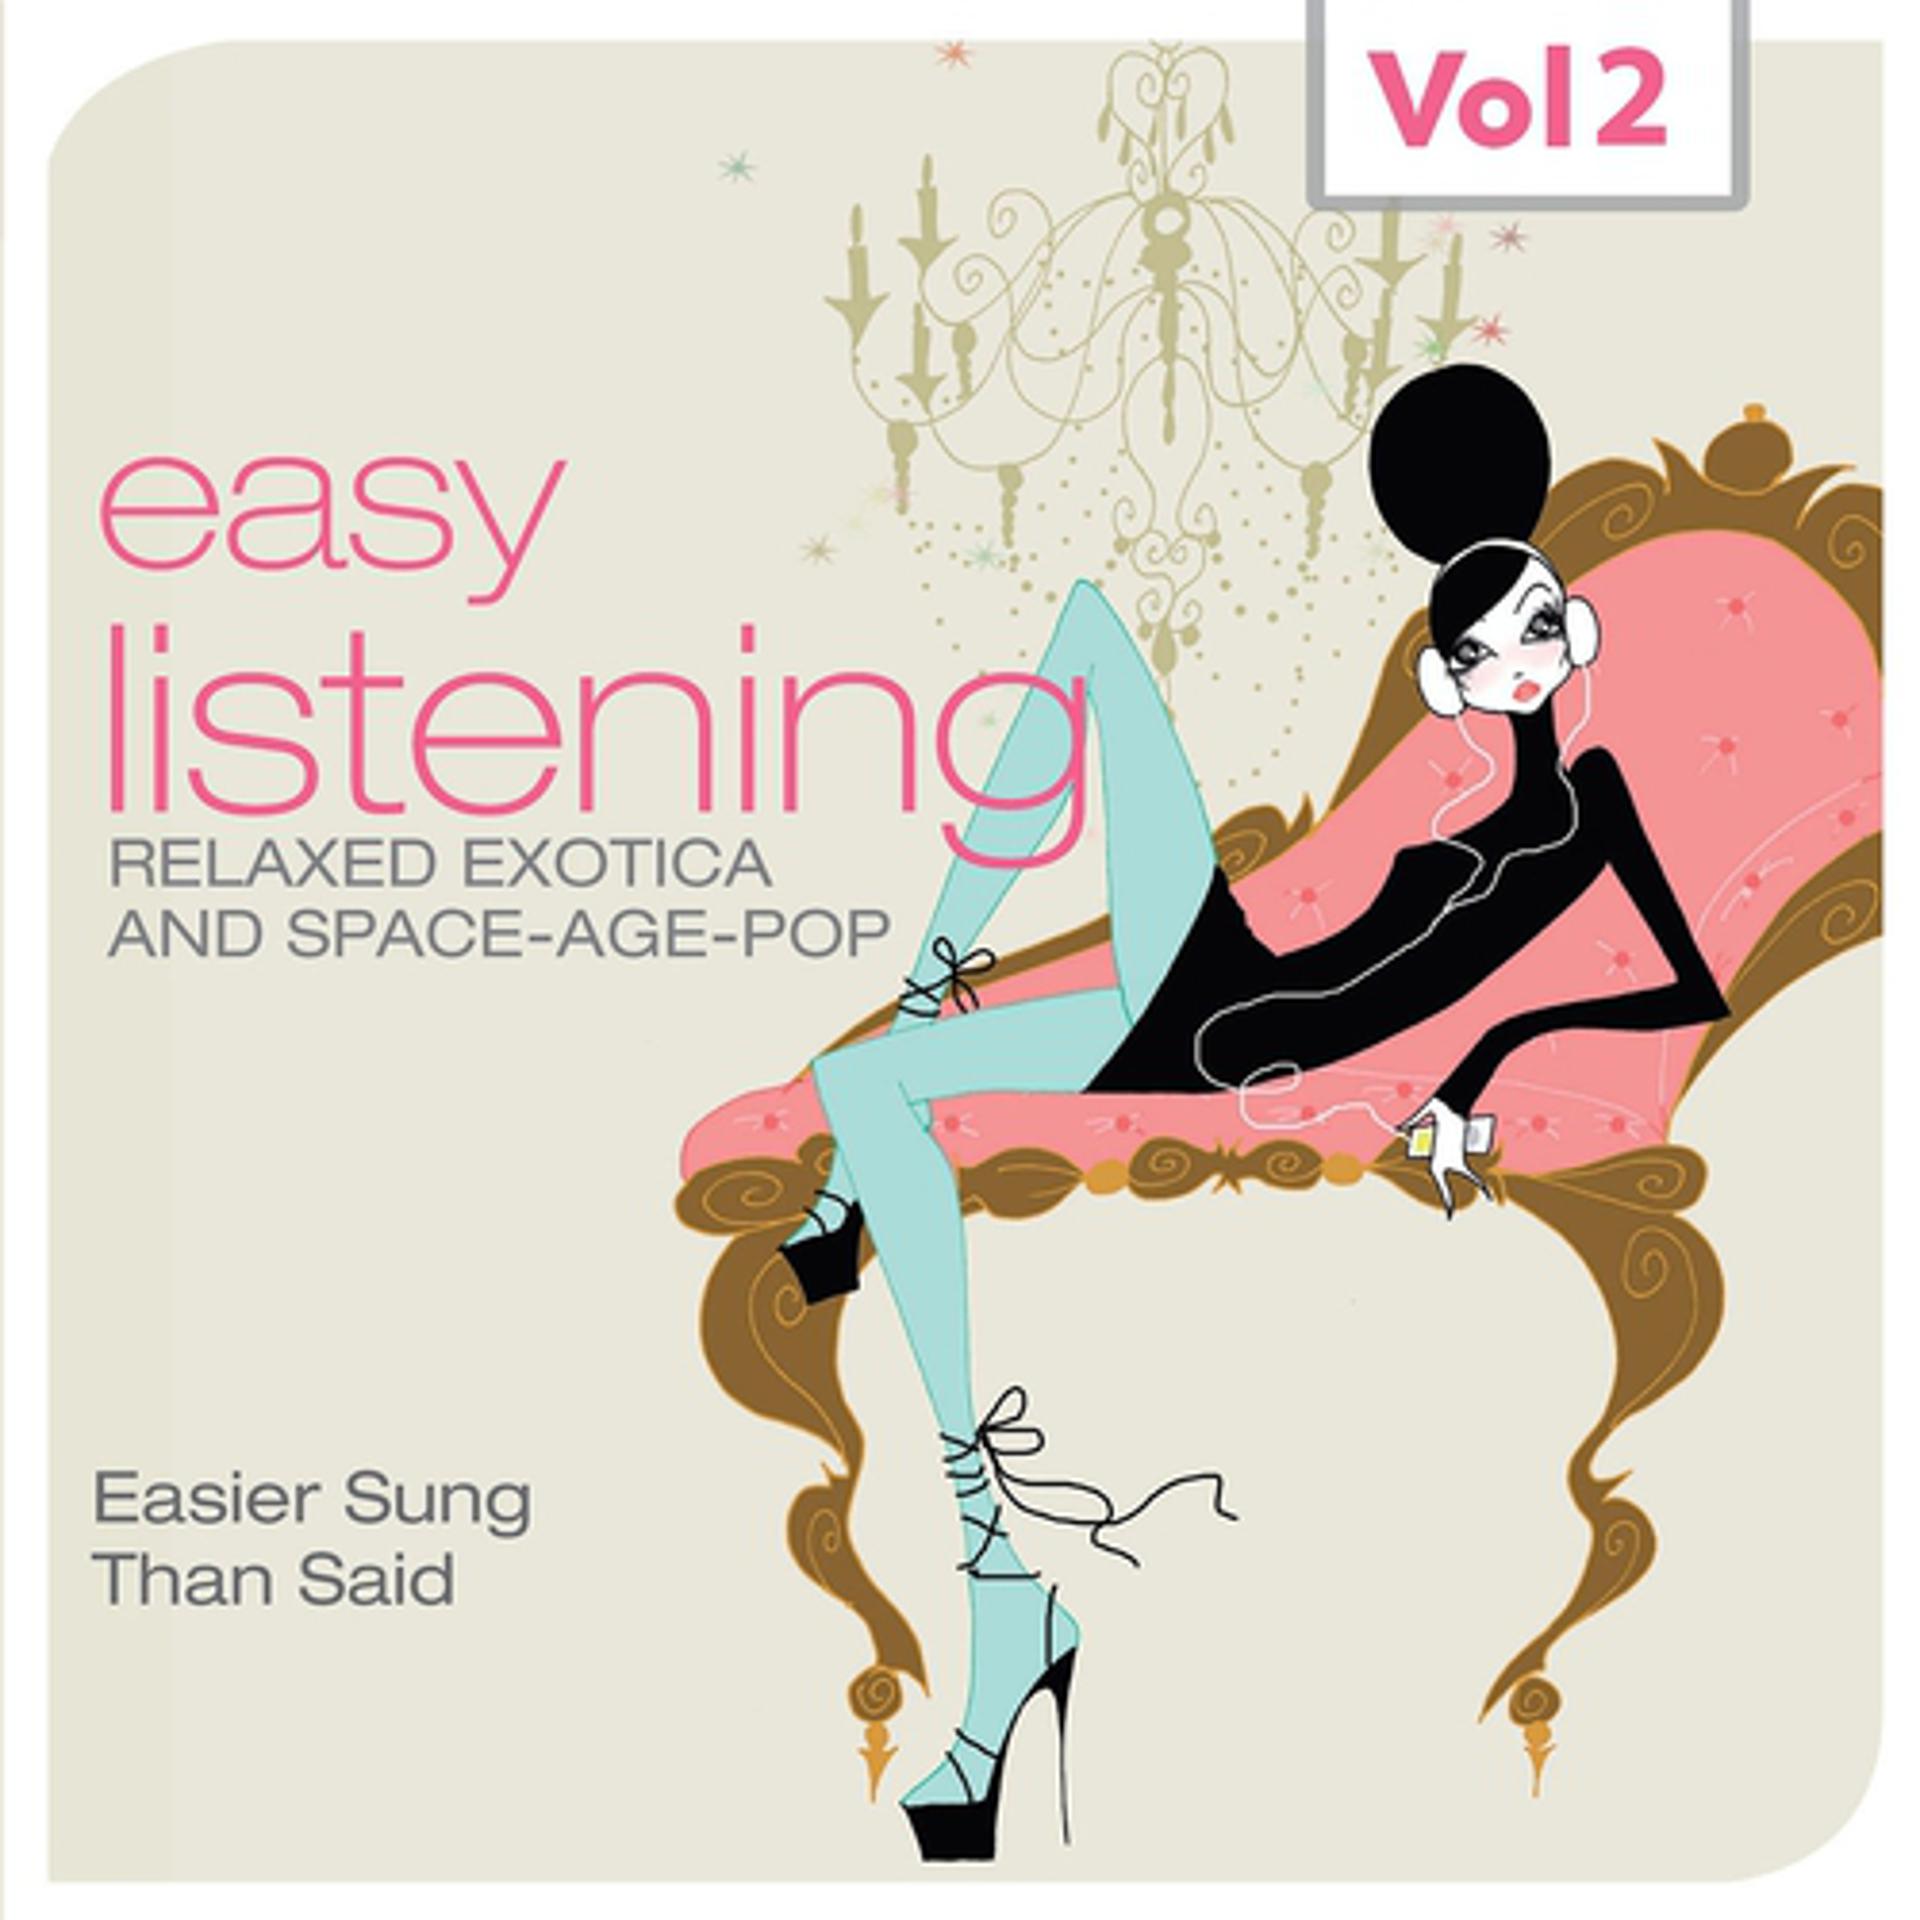 Постер альбома Easy Listening, Vol. 2 (Relaxed Exotica and Space-Age-Pop, Easier Sung Than Said)